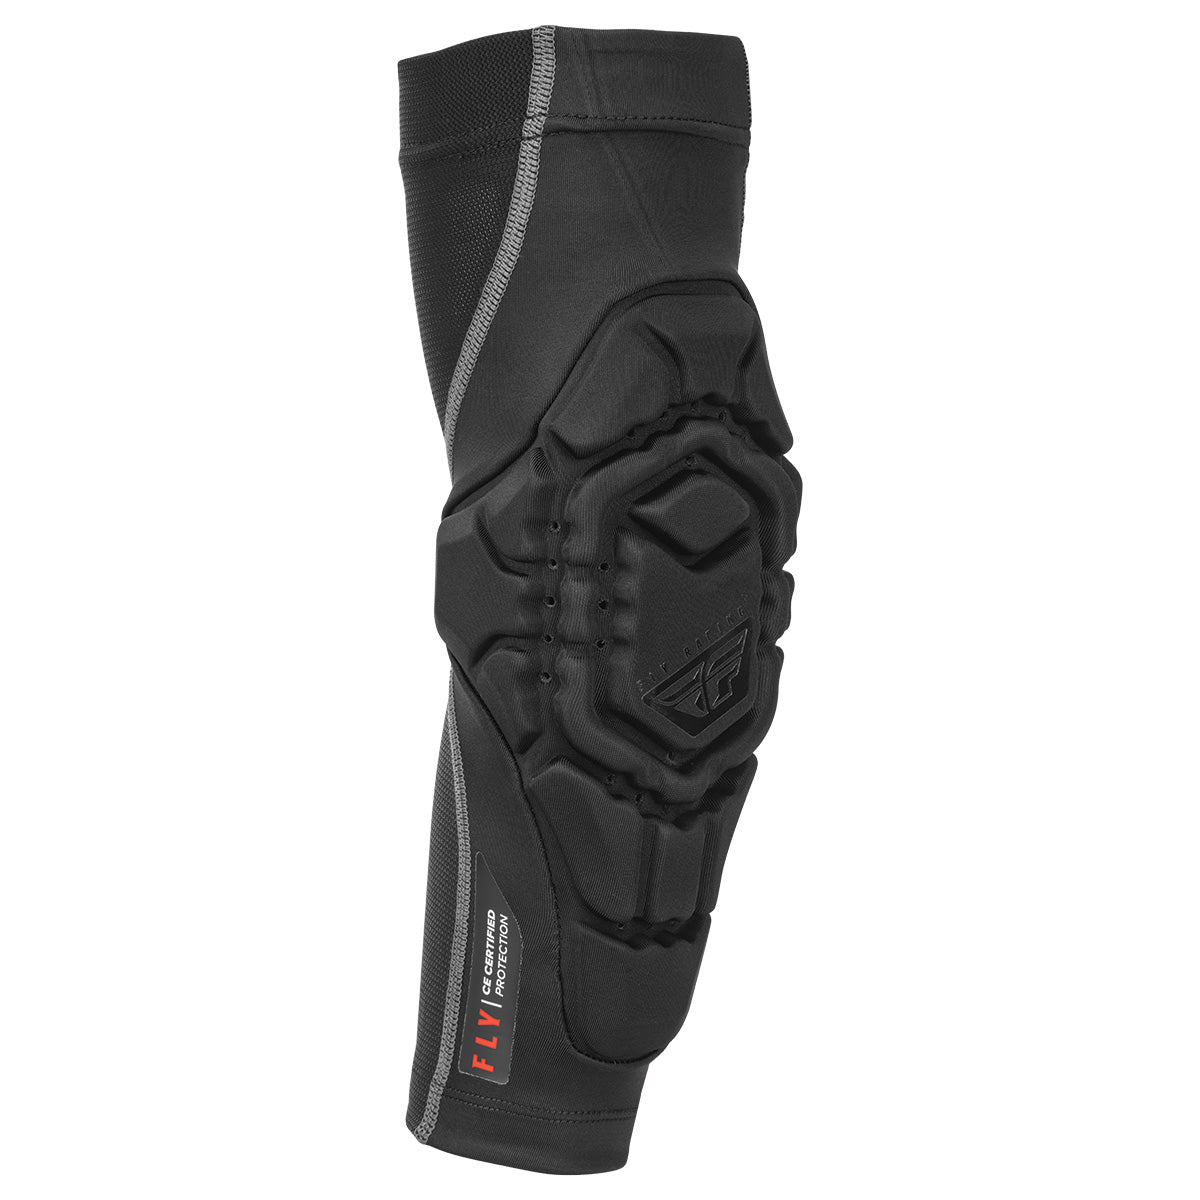 FLY-RACING-LITE-CE-ELBOW-GUARD-SP23 - RIDING GEAR - Synik Clothing - synikclothing.com